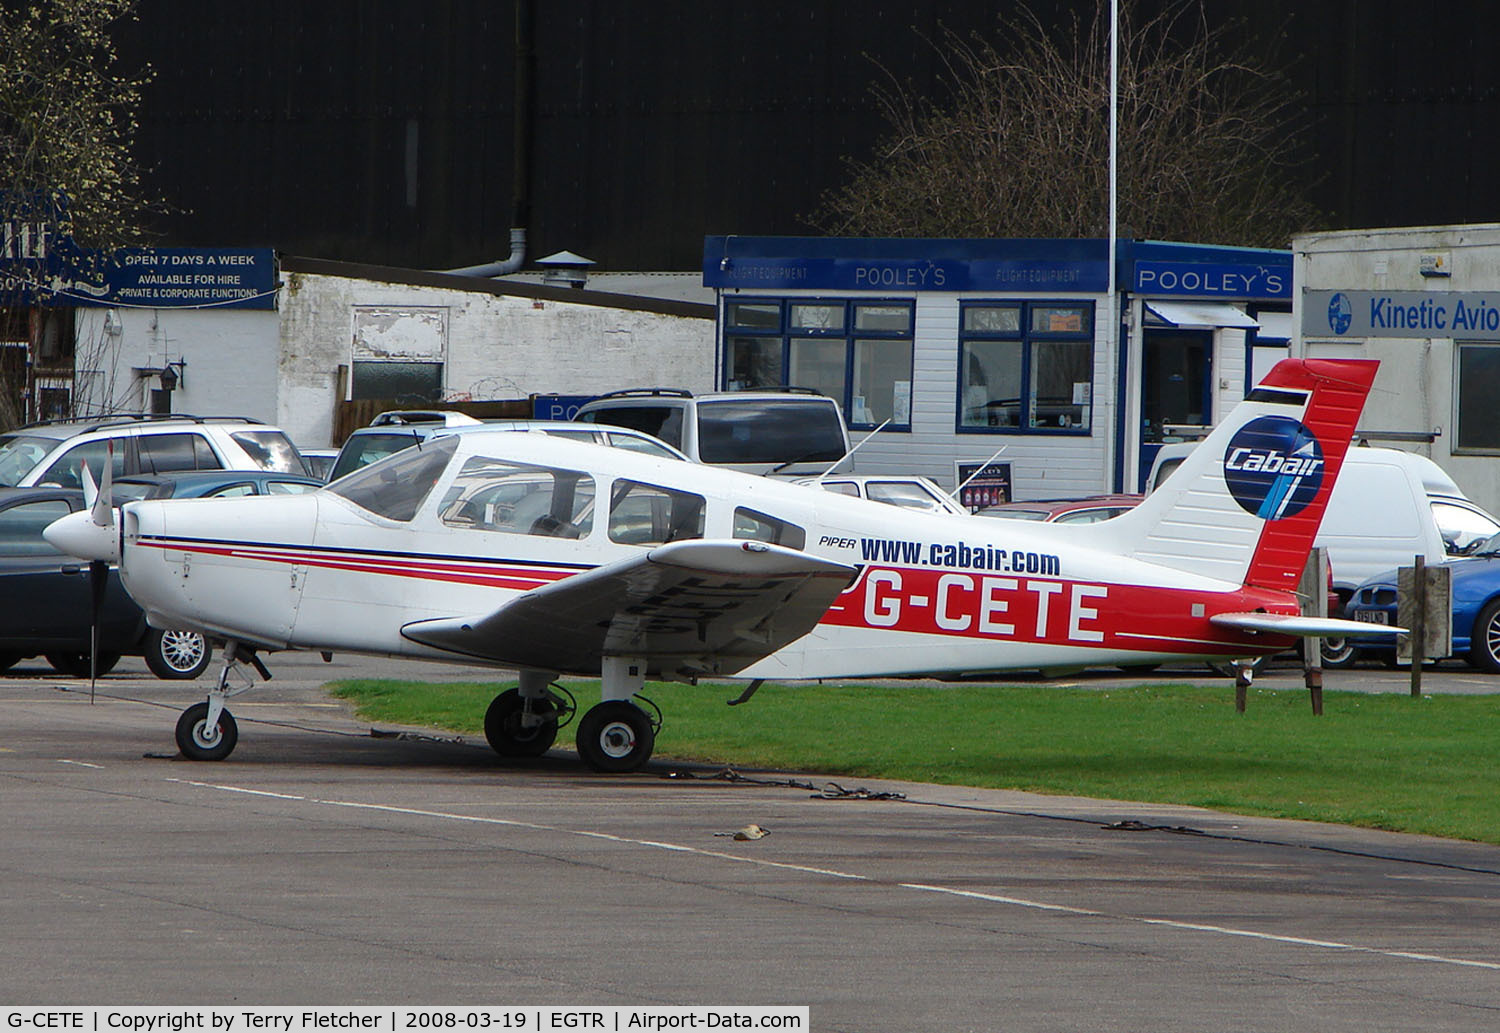 G-CETE, 2000 Piper PA-28-161 Cherokee Warrior III C/N 2842079, Part of the busy GA scene at Elstree Airfield in the northern suburbs of London